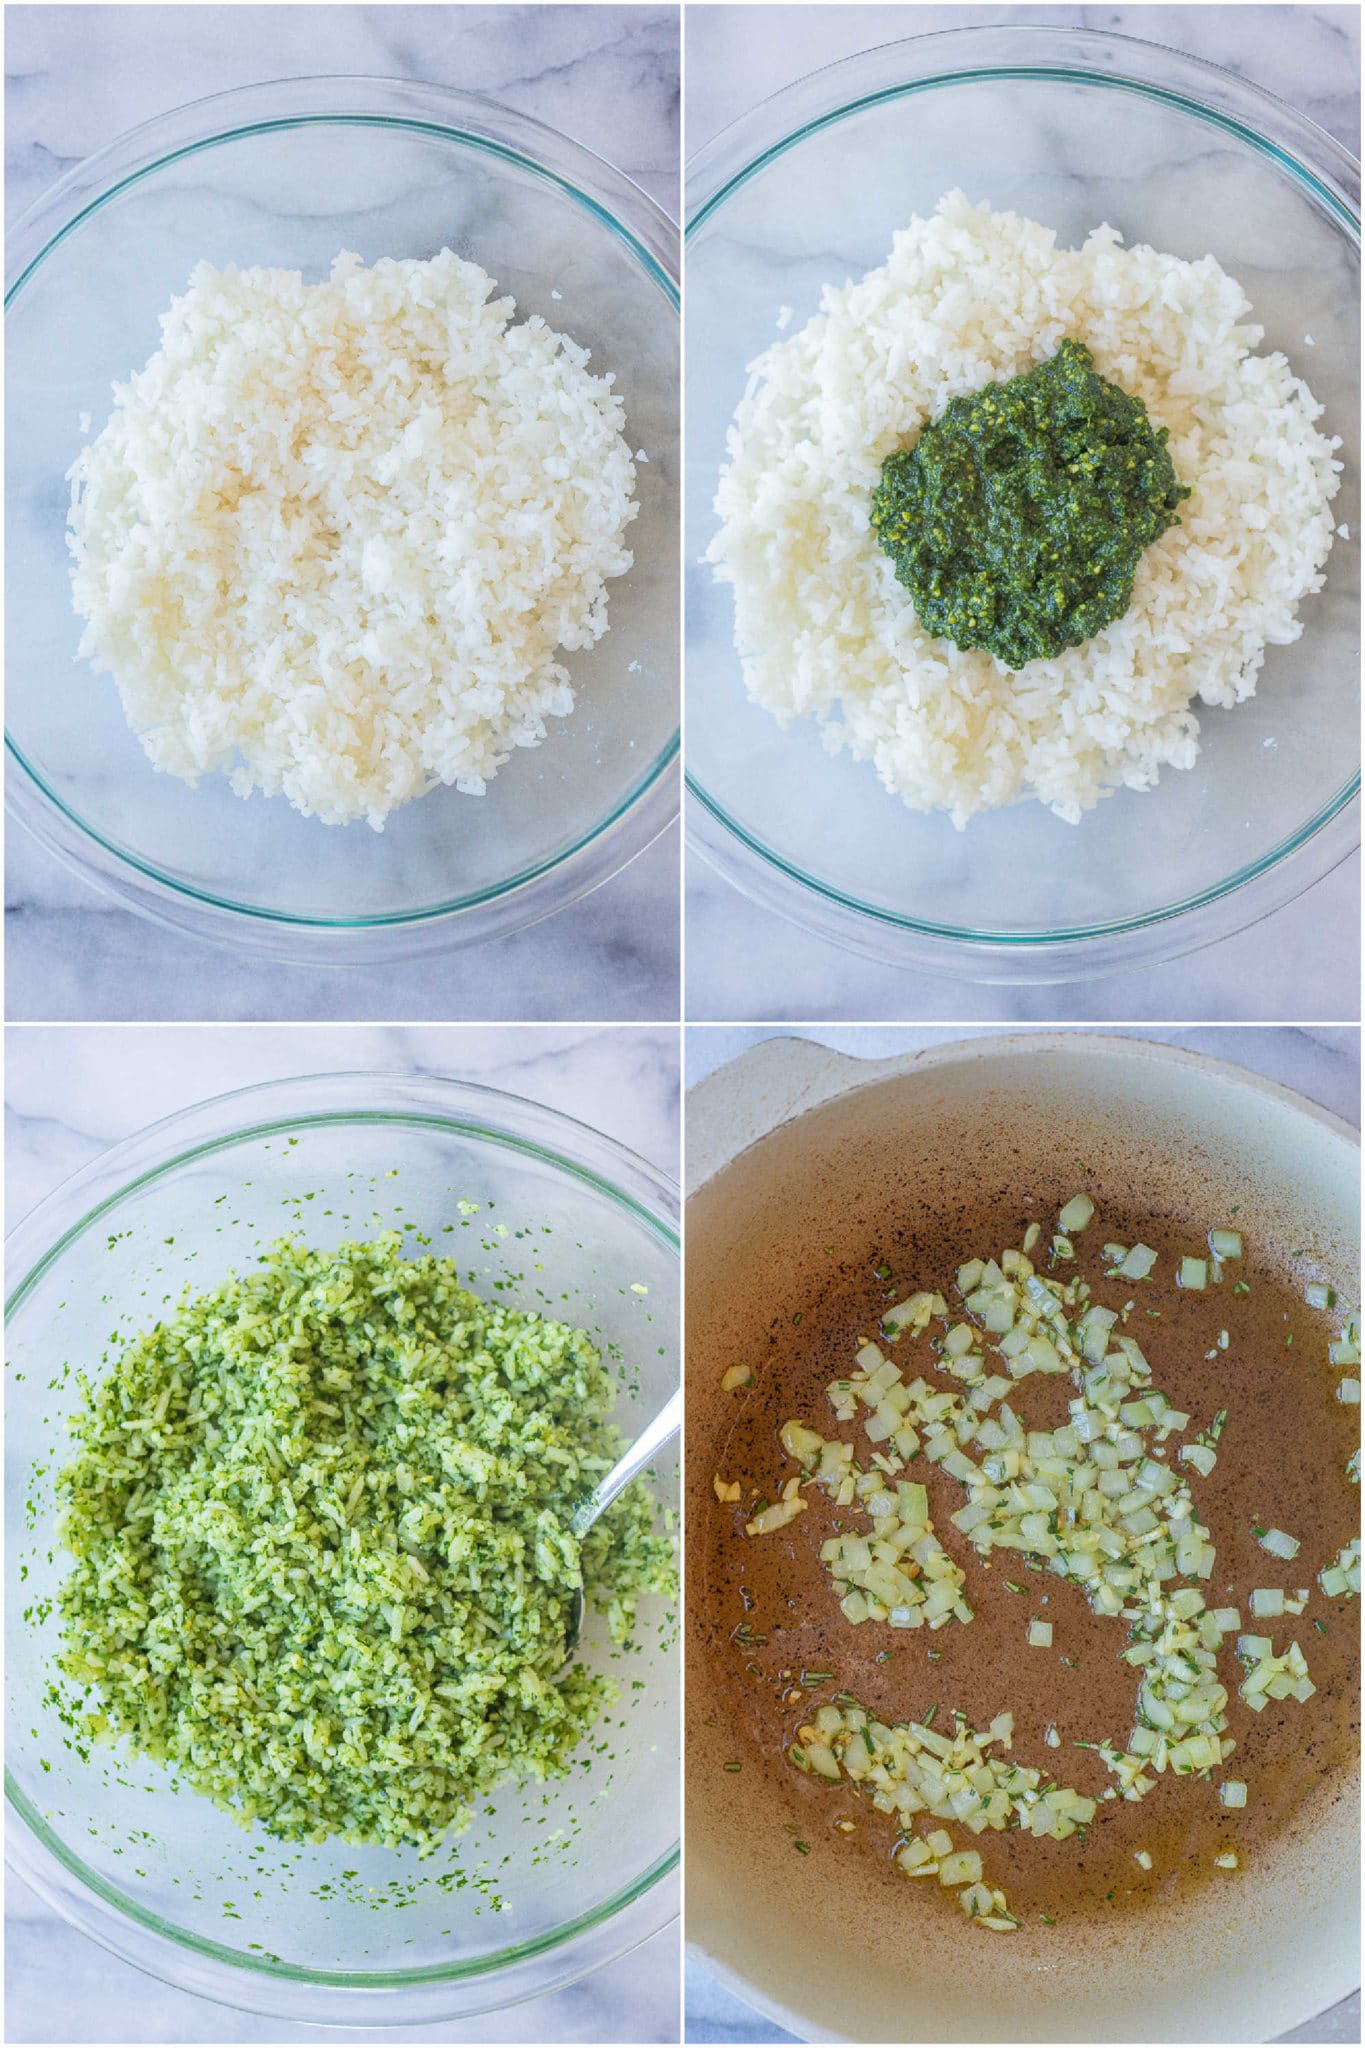 showing how to make the pesto rice by adding pesto sauce into some white rice and mixing it together